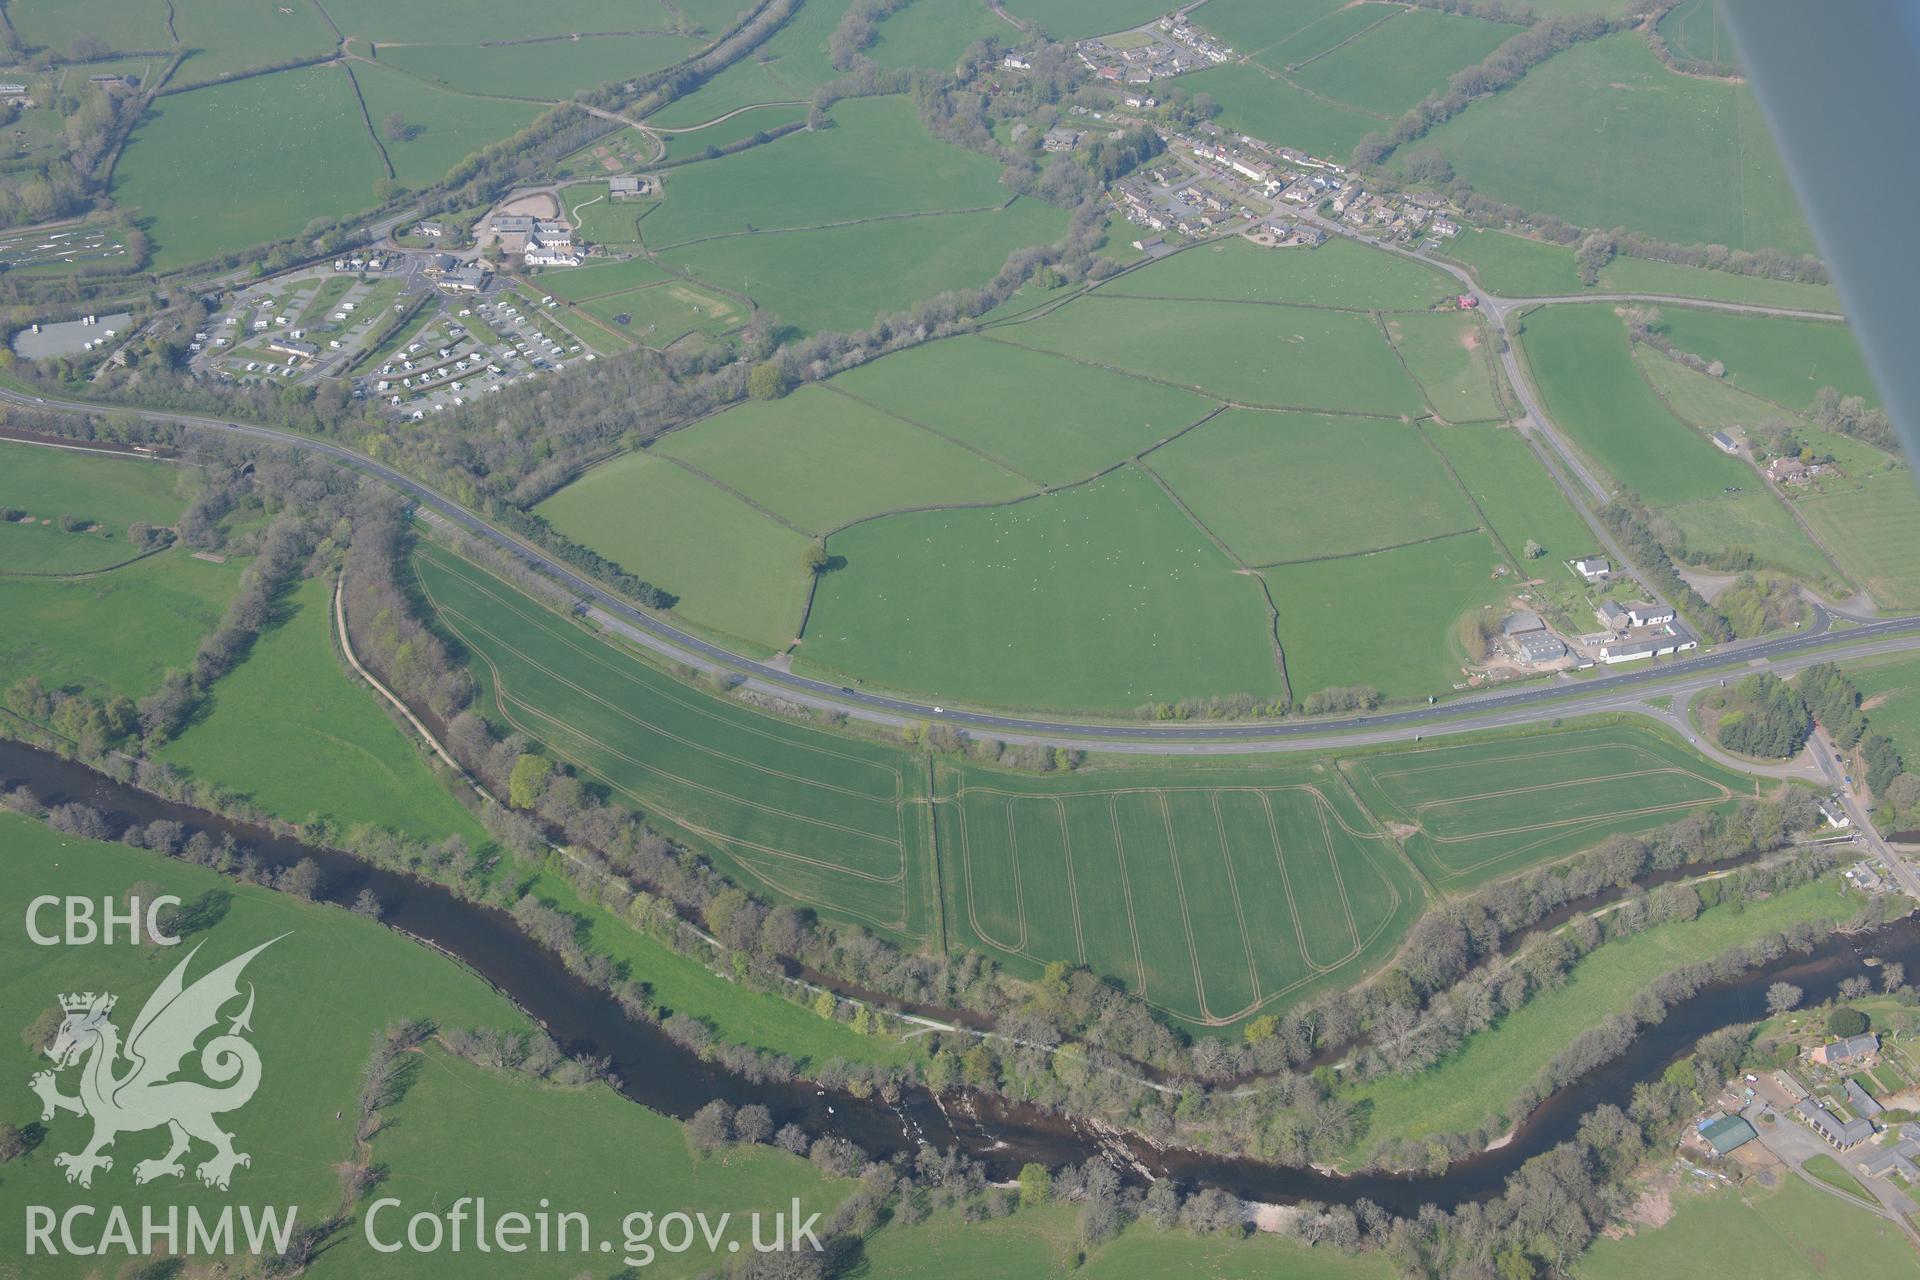 Cefn-Brynich Roman Fort and Cefn Brynich Farm including farmhouse, garden, barns and outbuildings. Oblique aerial photograph taken during the Royal Commission's programme of archaeological aerial reconnaissance by Toby Driver on 21st April 2015